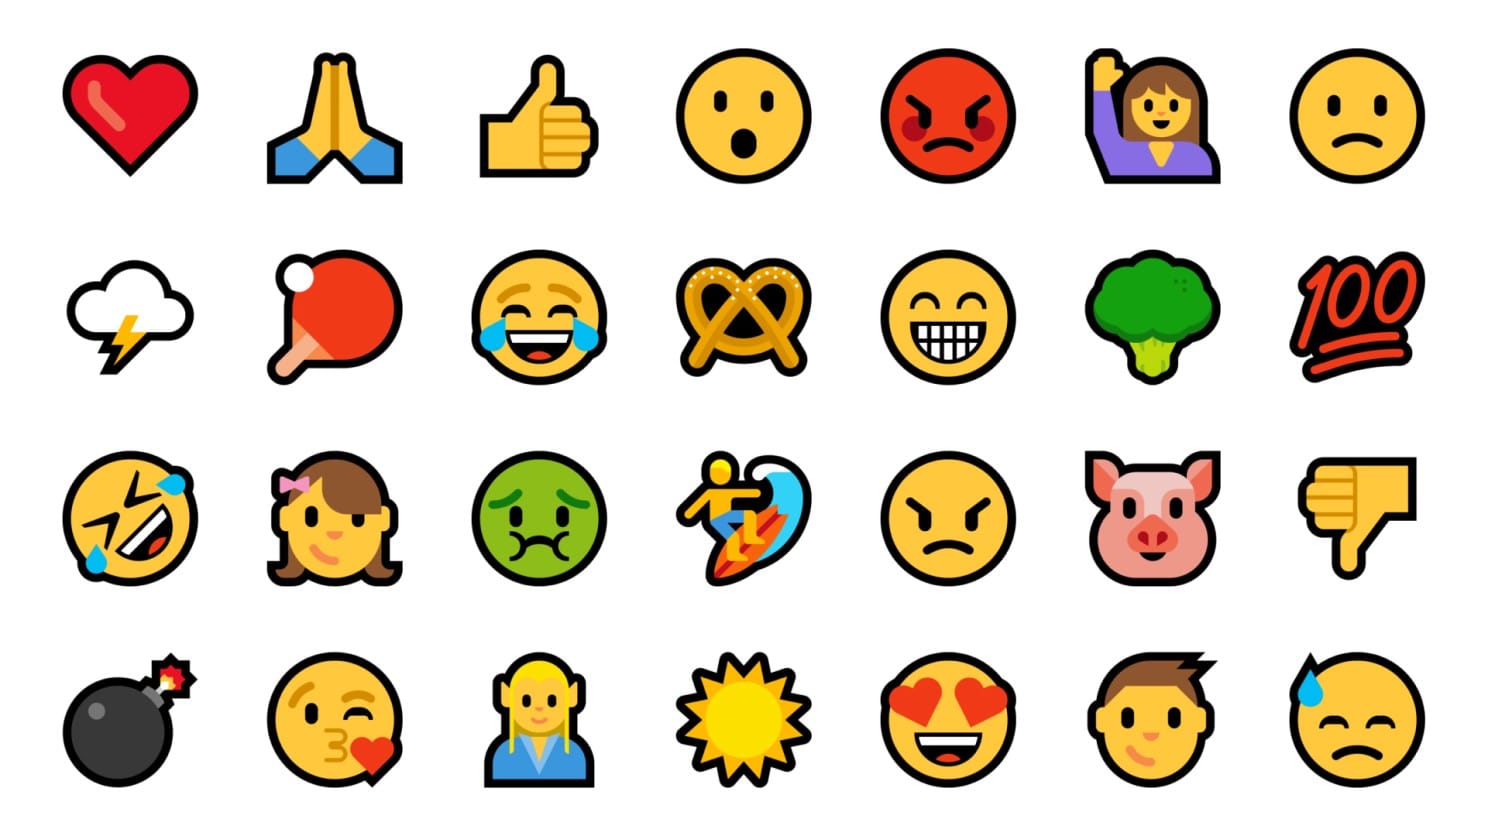 Image compiling an assortment of 28 or our old emojis.